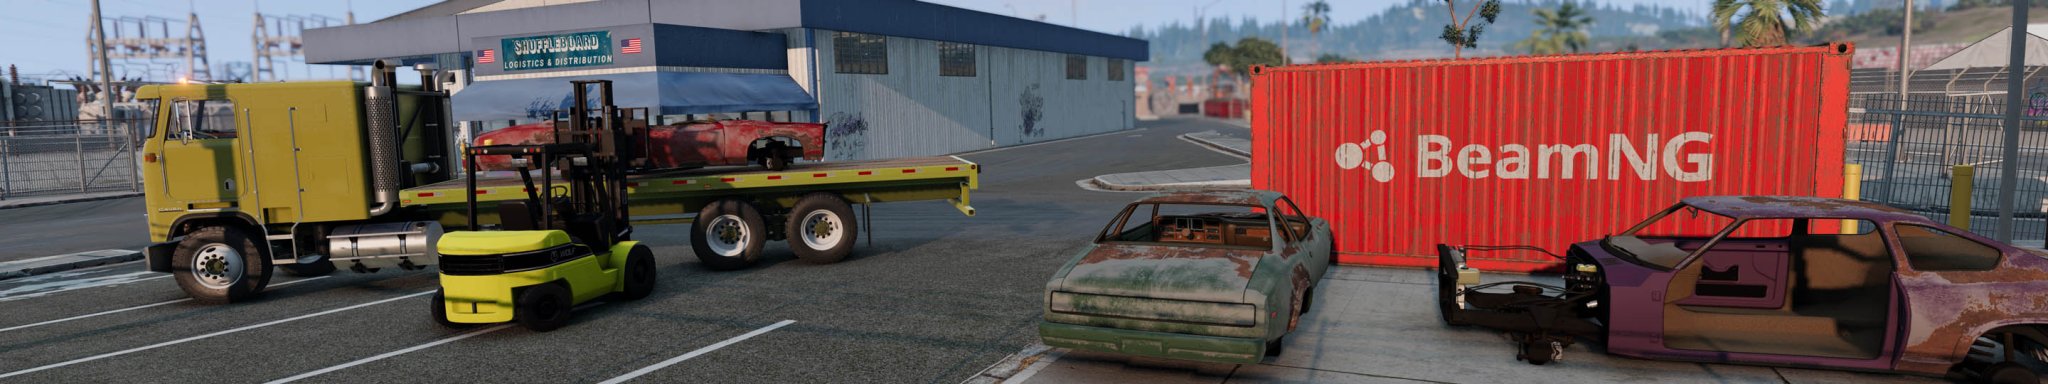 0 BeamNG CRUSHED CARS to HOT ROLLED Inc STEEL copy.jpg